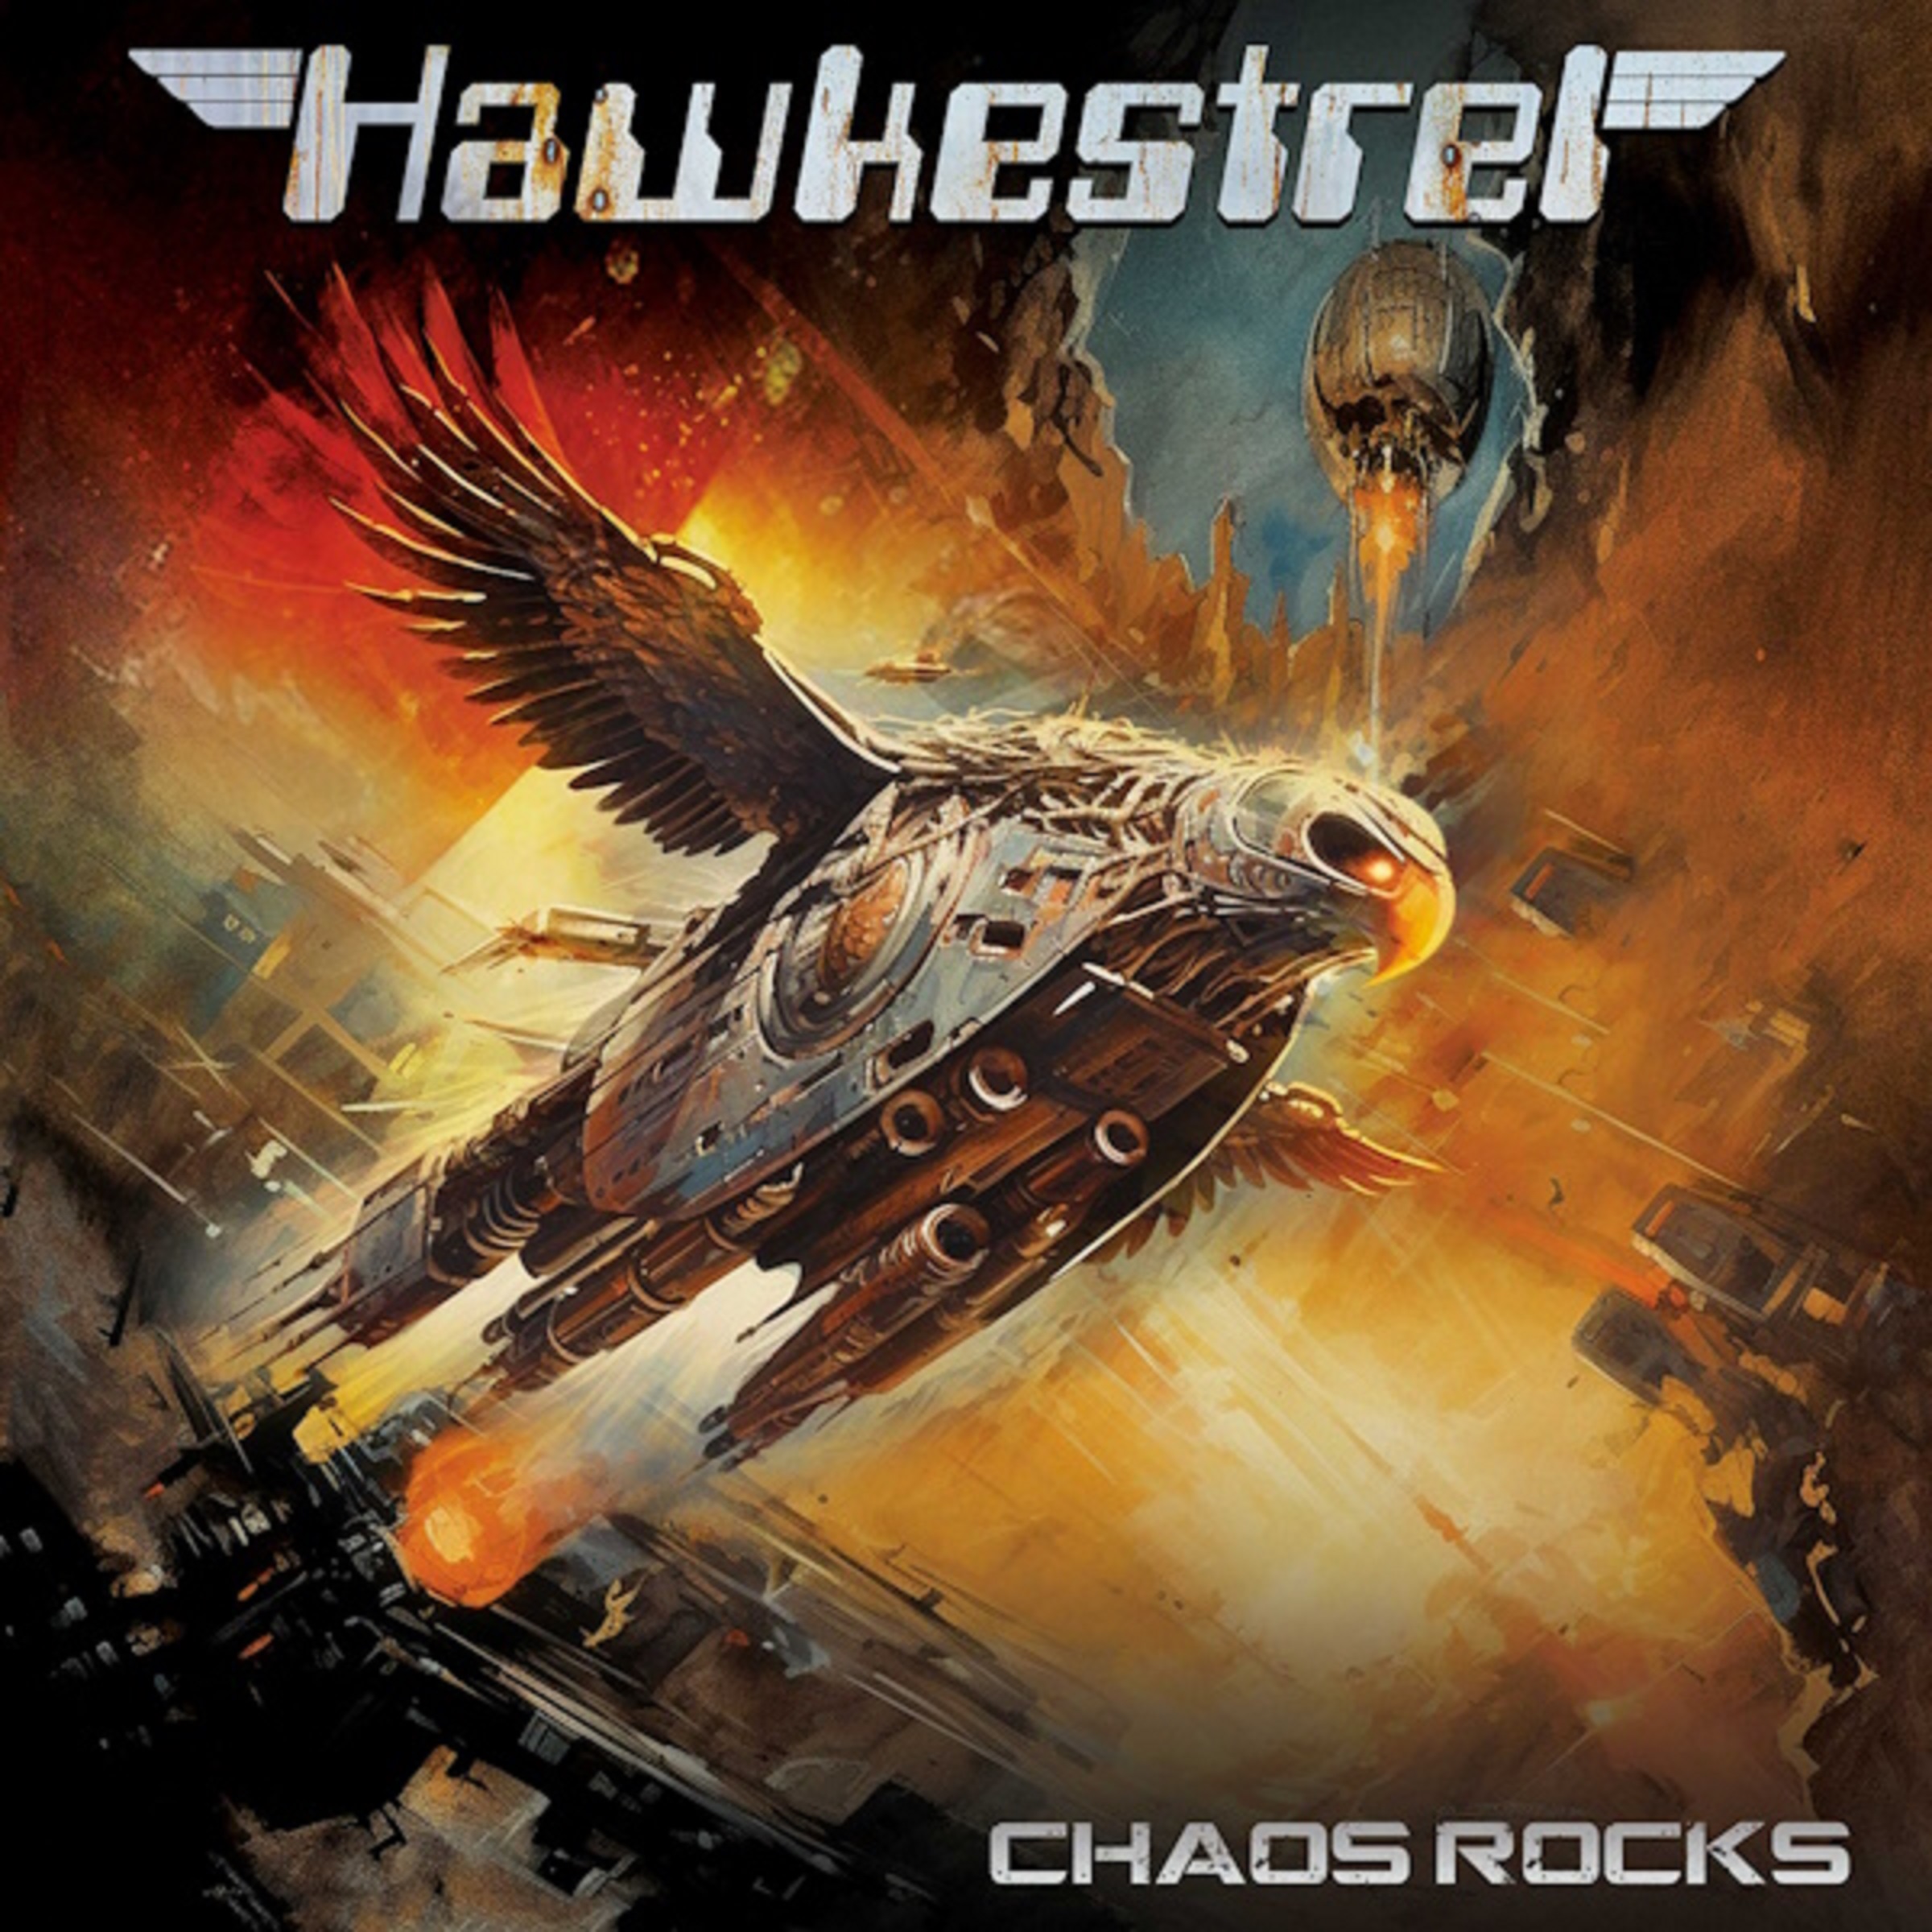 Former HAWKWIND Members ROBERT CALVERT & ALAN DAVEY Join THE ROLLING STONES’ MICK TAYLOR For A Transdimensional Rock Anthem From Upcoming Album CHAOS ROCKS